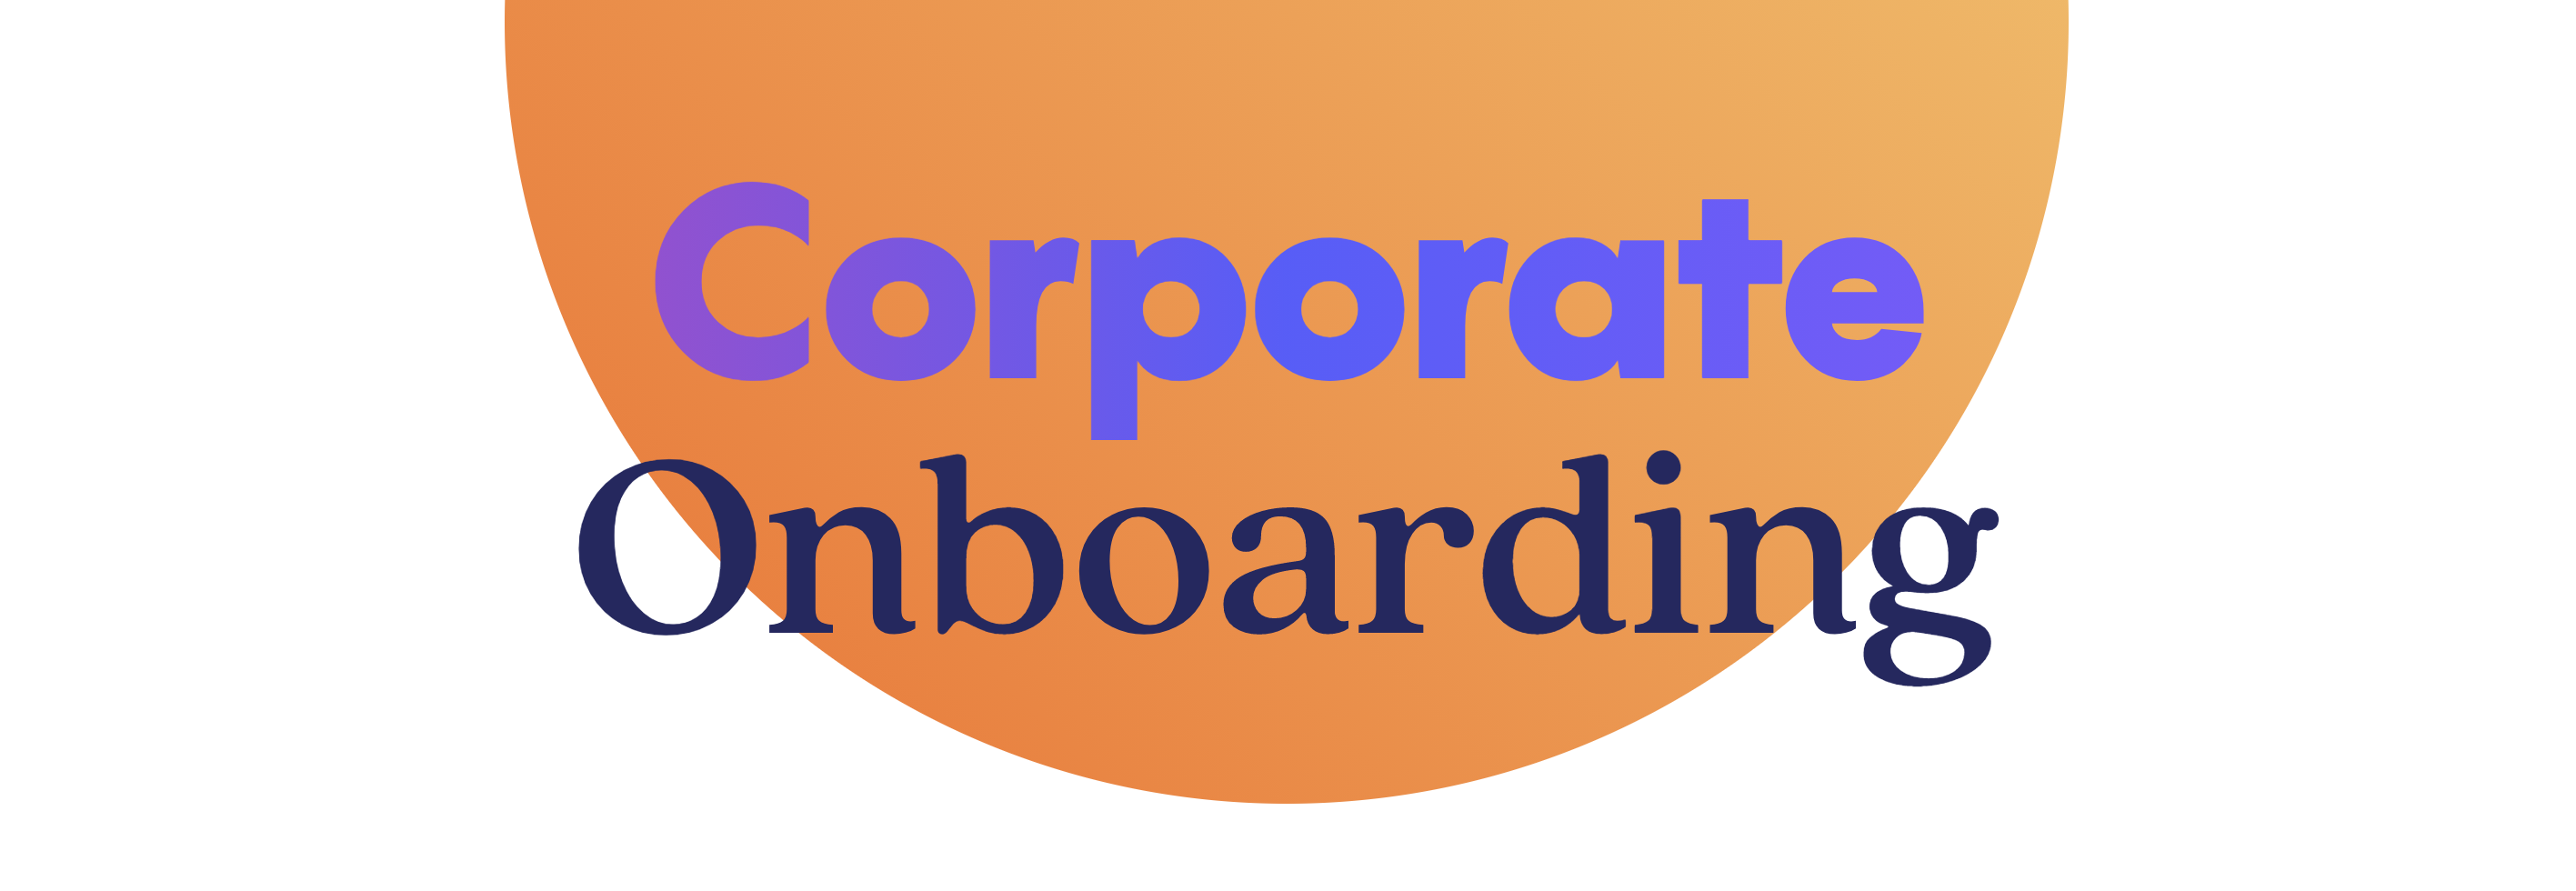 I'm a corporate client. How do I get onboarding with ...